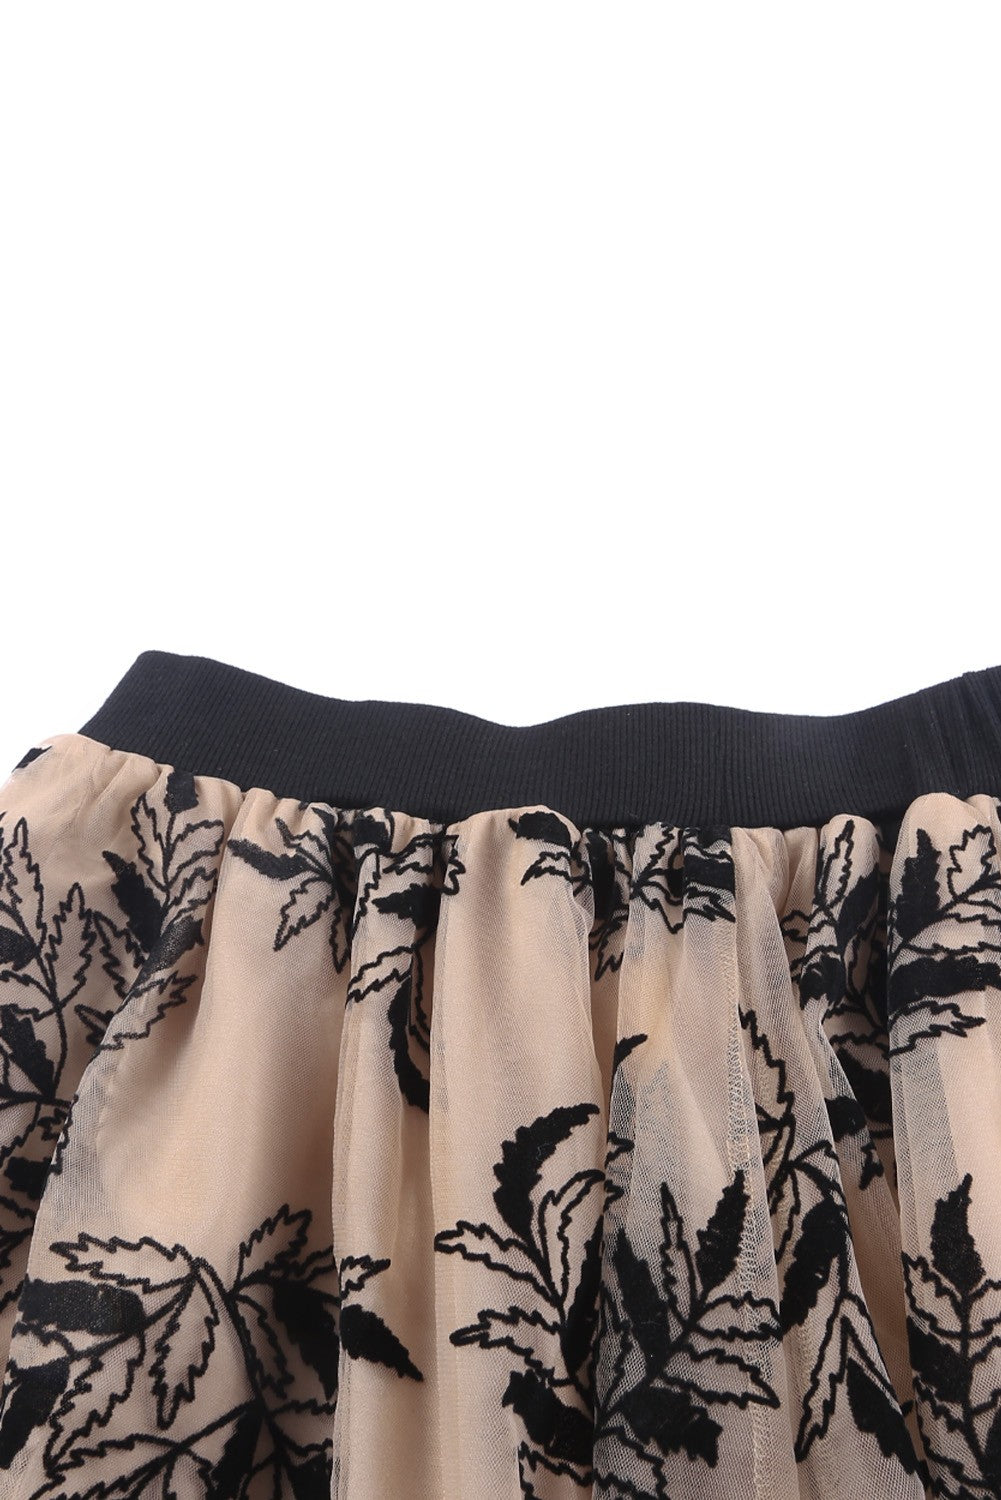 Very Chic Embroidered Tulle Skirt